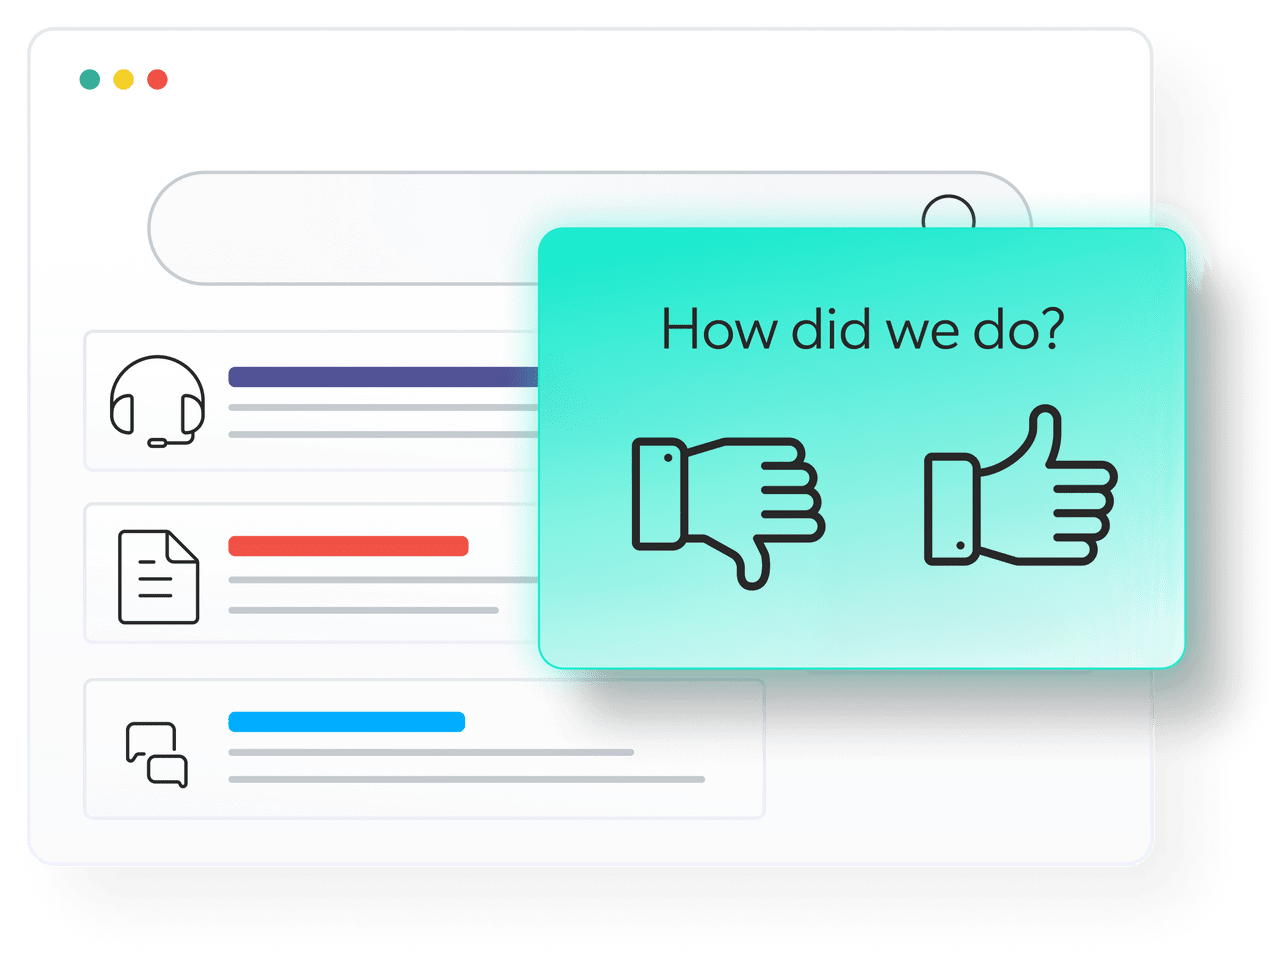 A graphic shows one way to ask for feedback, via a "how did we do" pop-up on a search-powered self-service page